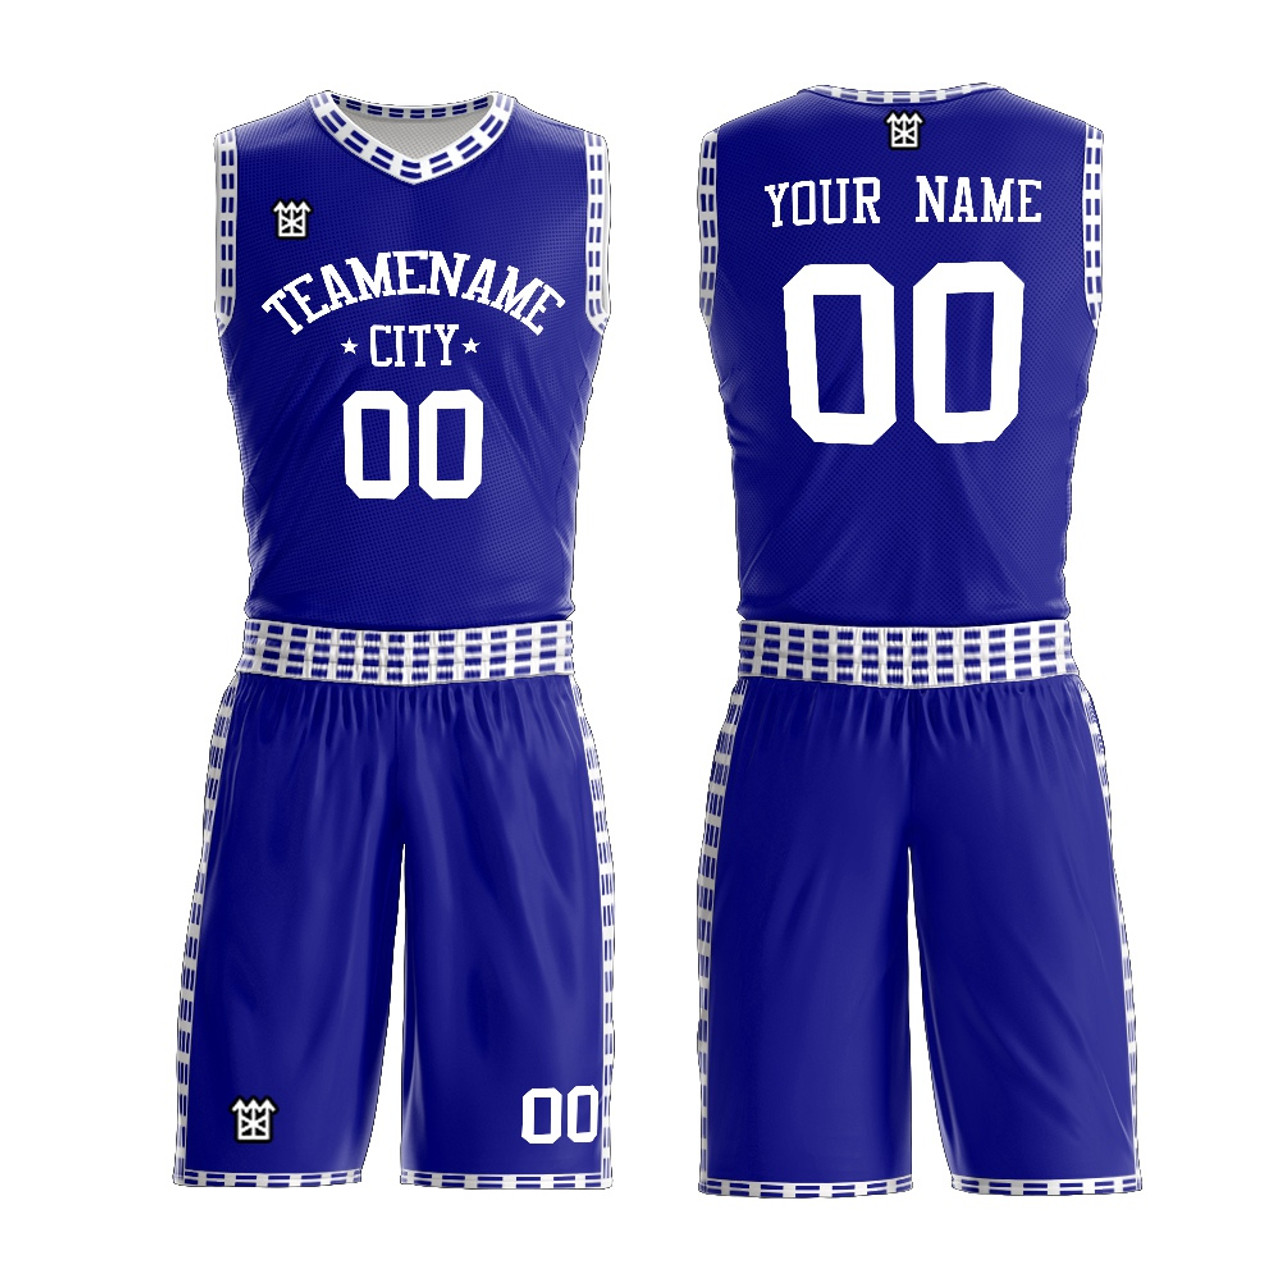 100% Polyester Basketball Vest And Shorts Color Royal Blue And